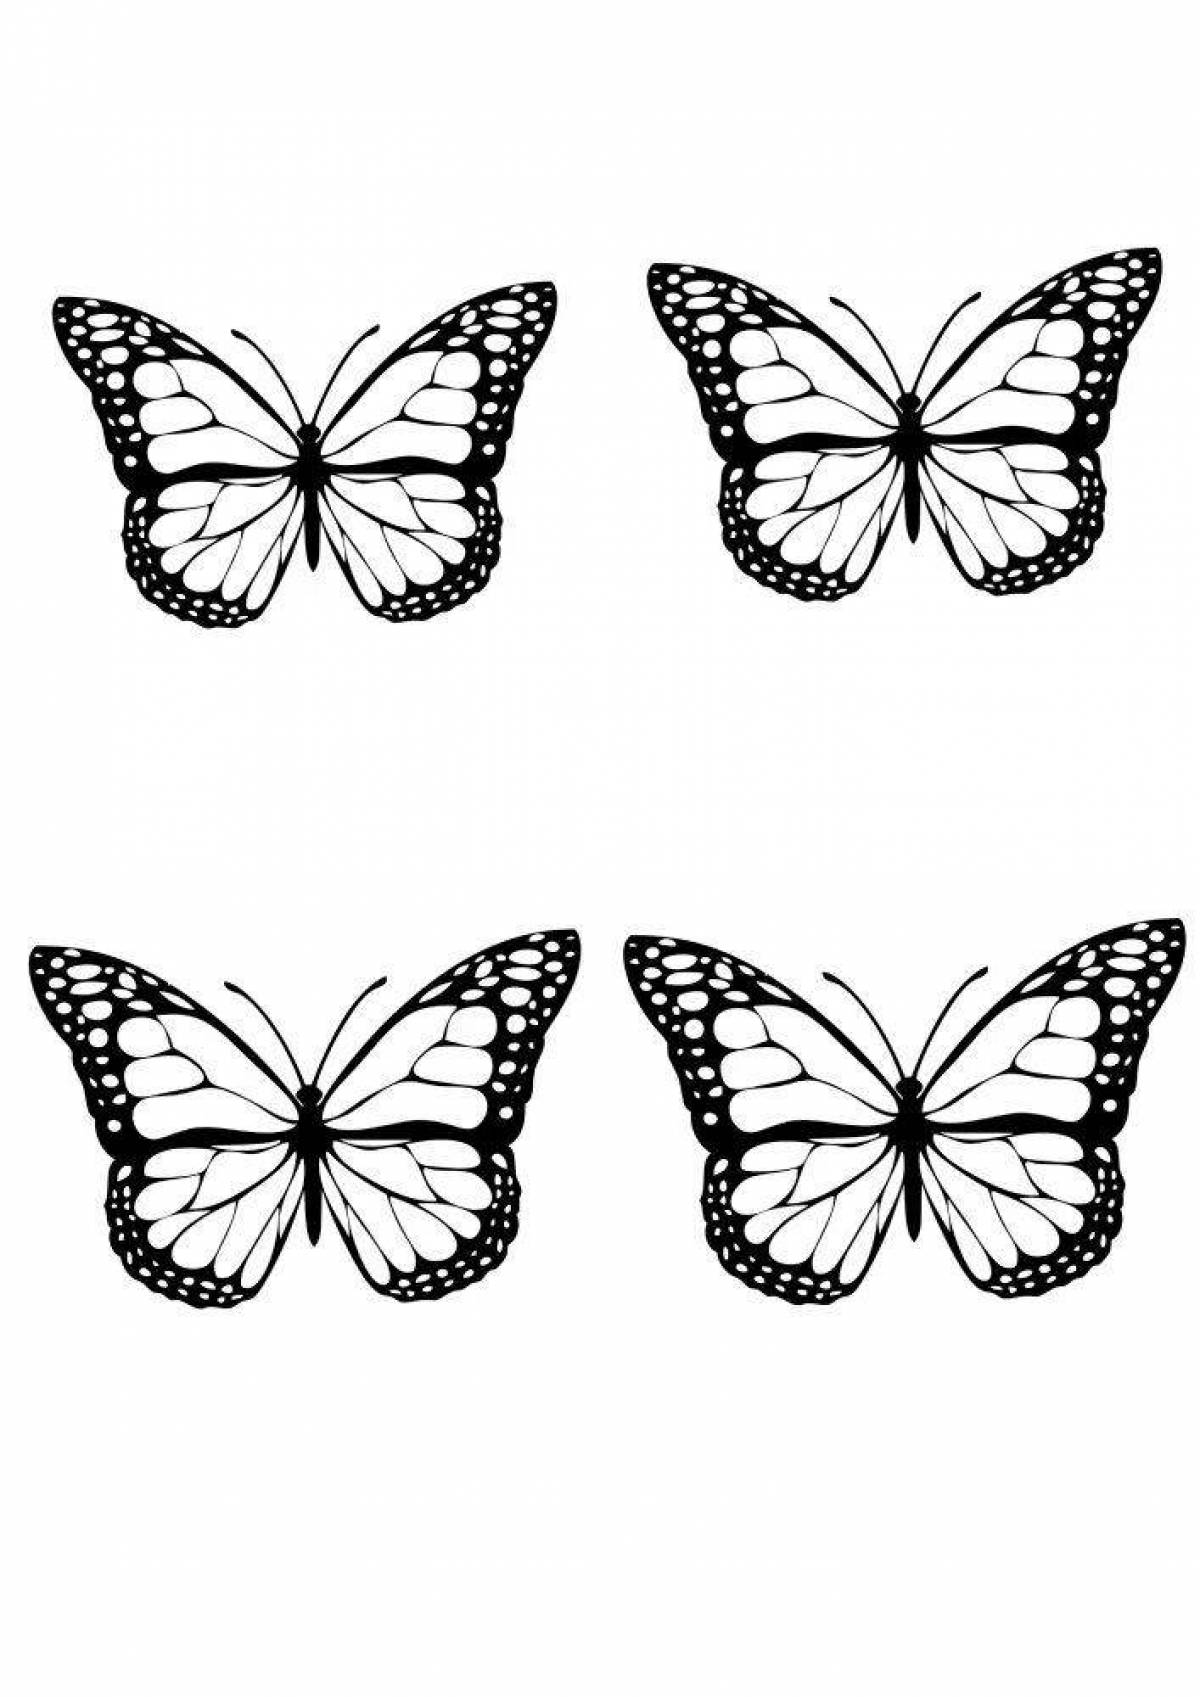 Luxury butterfly coloring pages